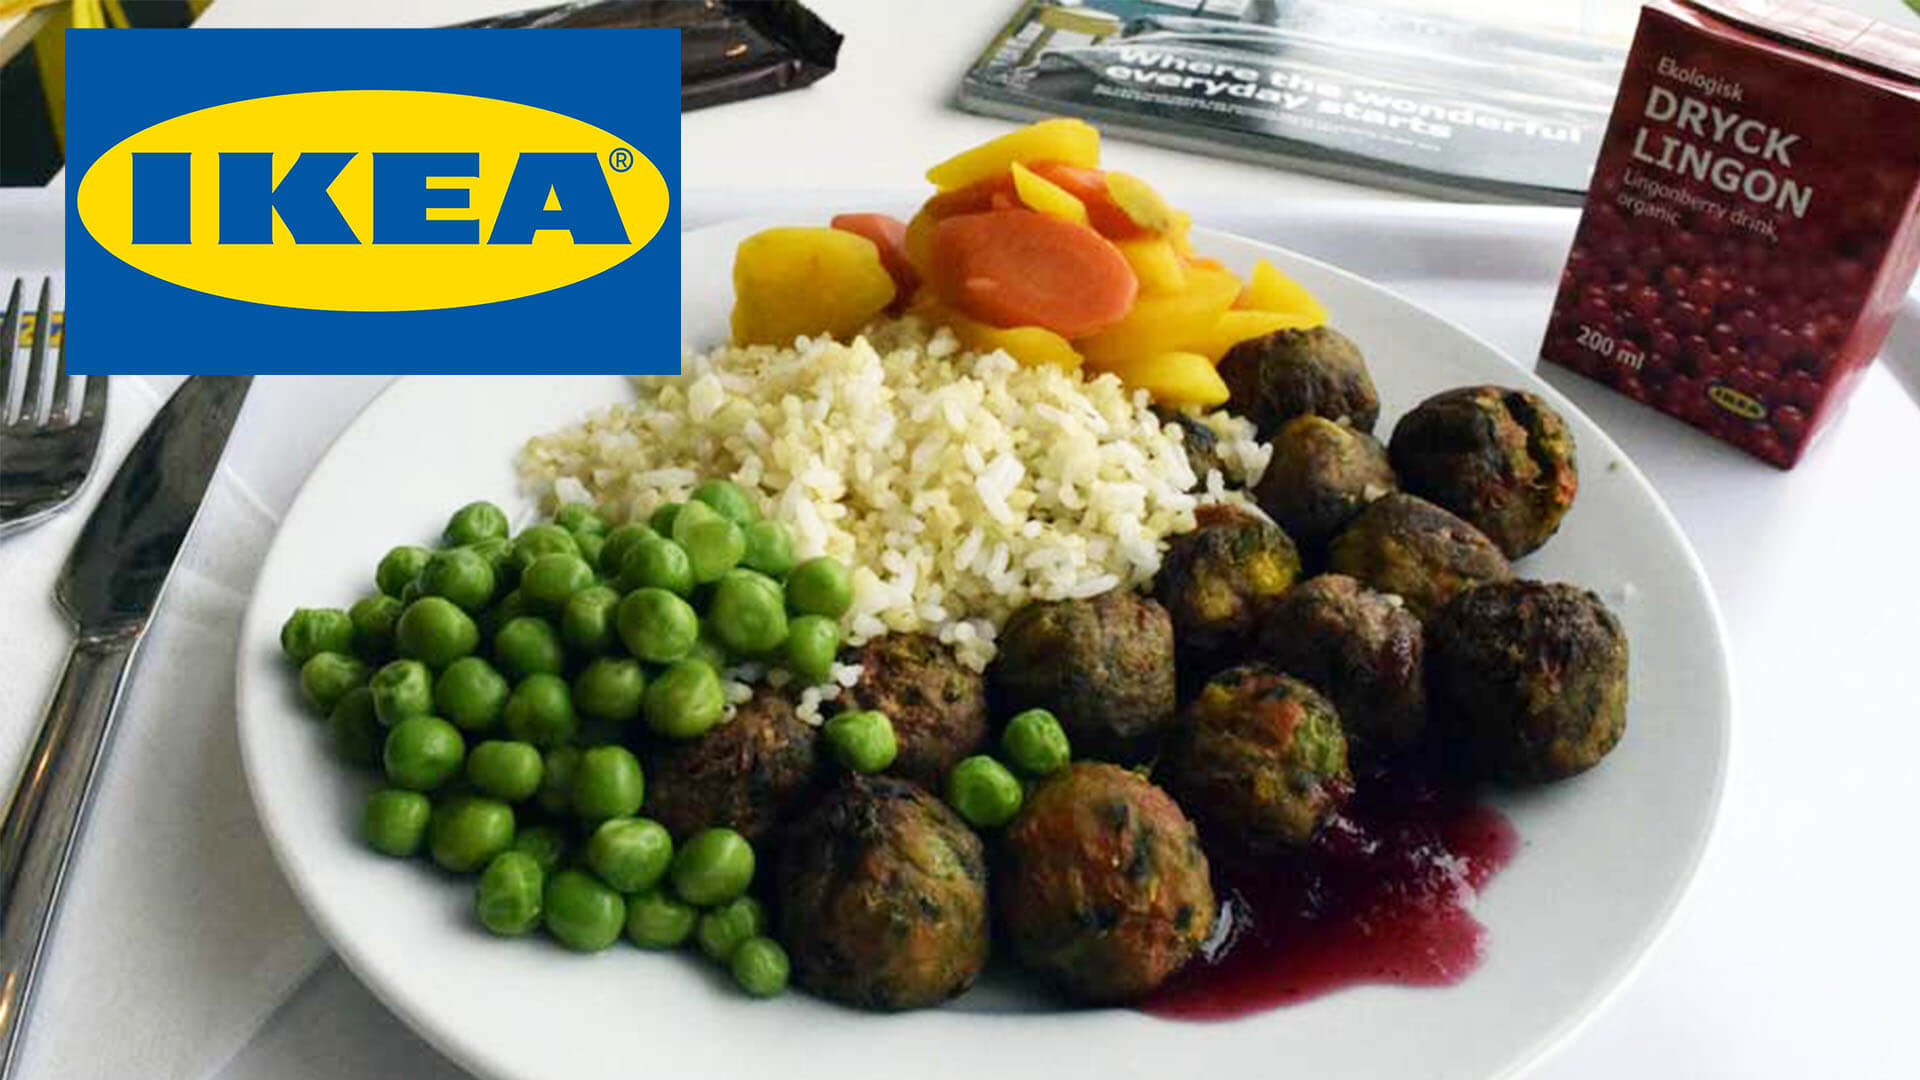 IKEA Just Banned Single-Use Plastic From Its Cafes